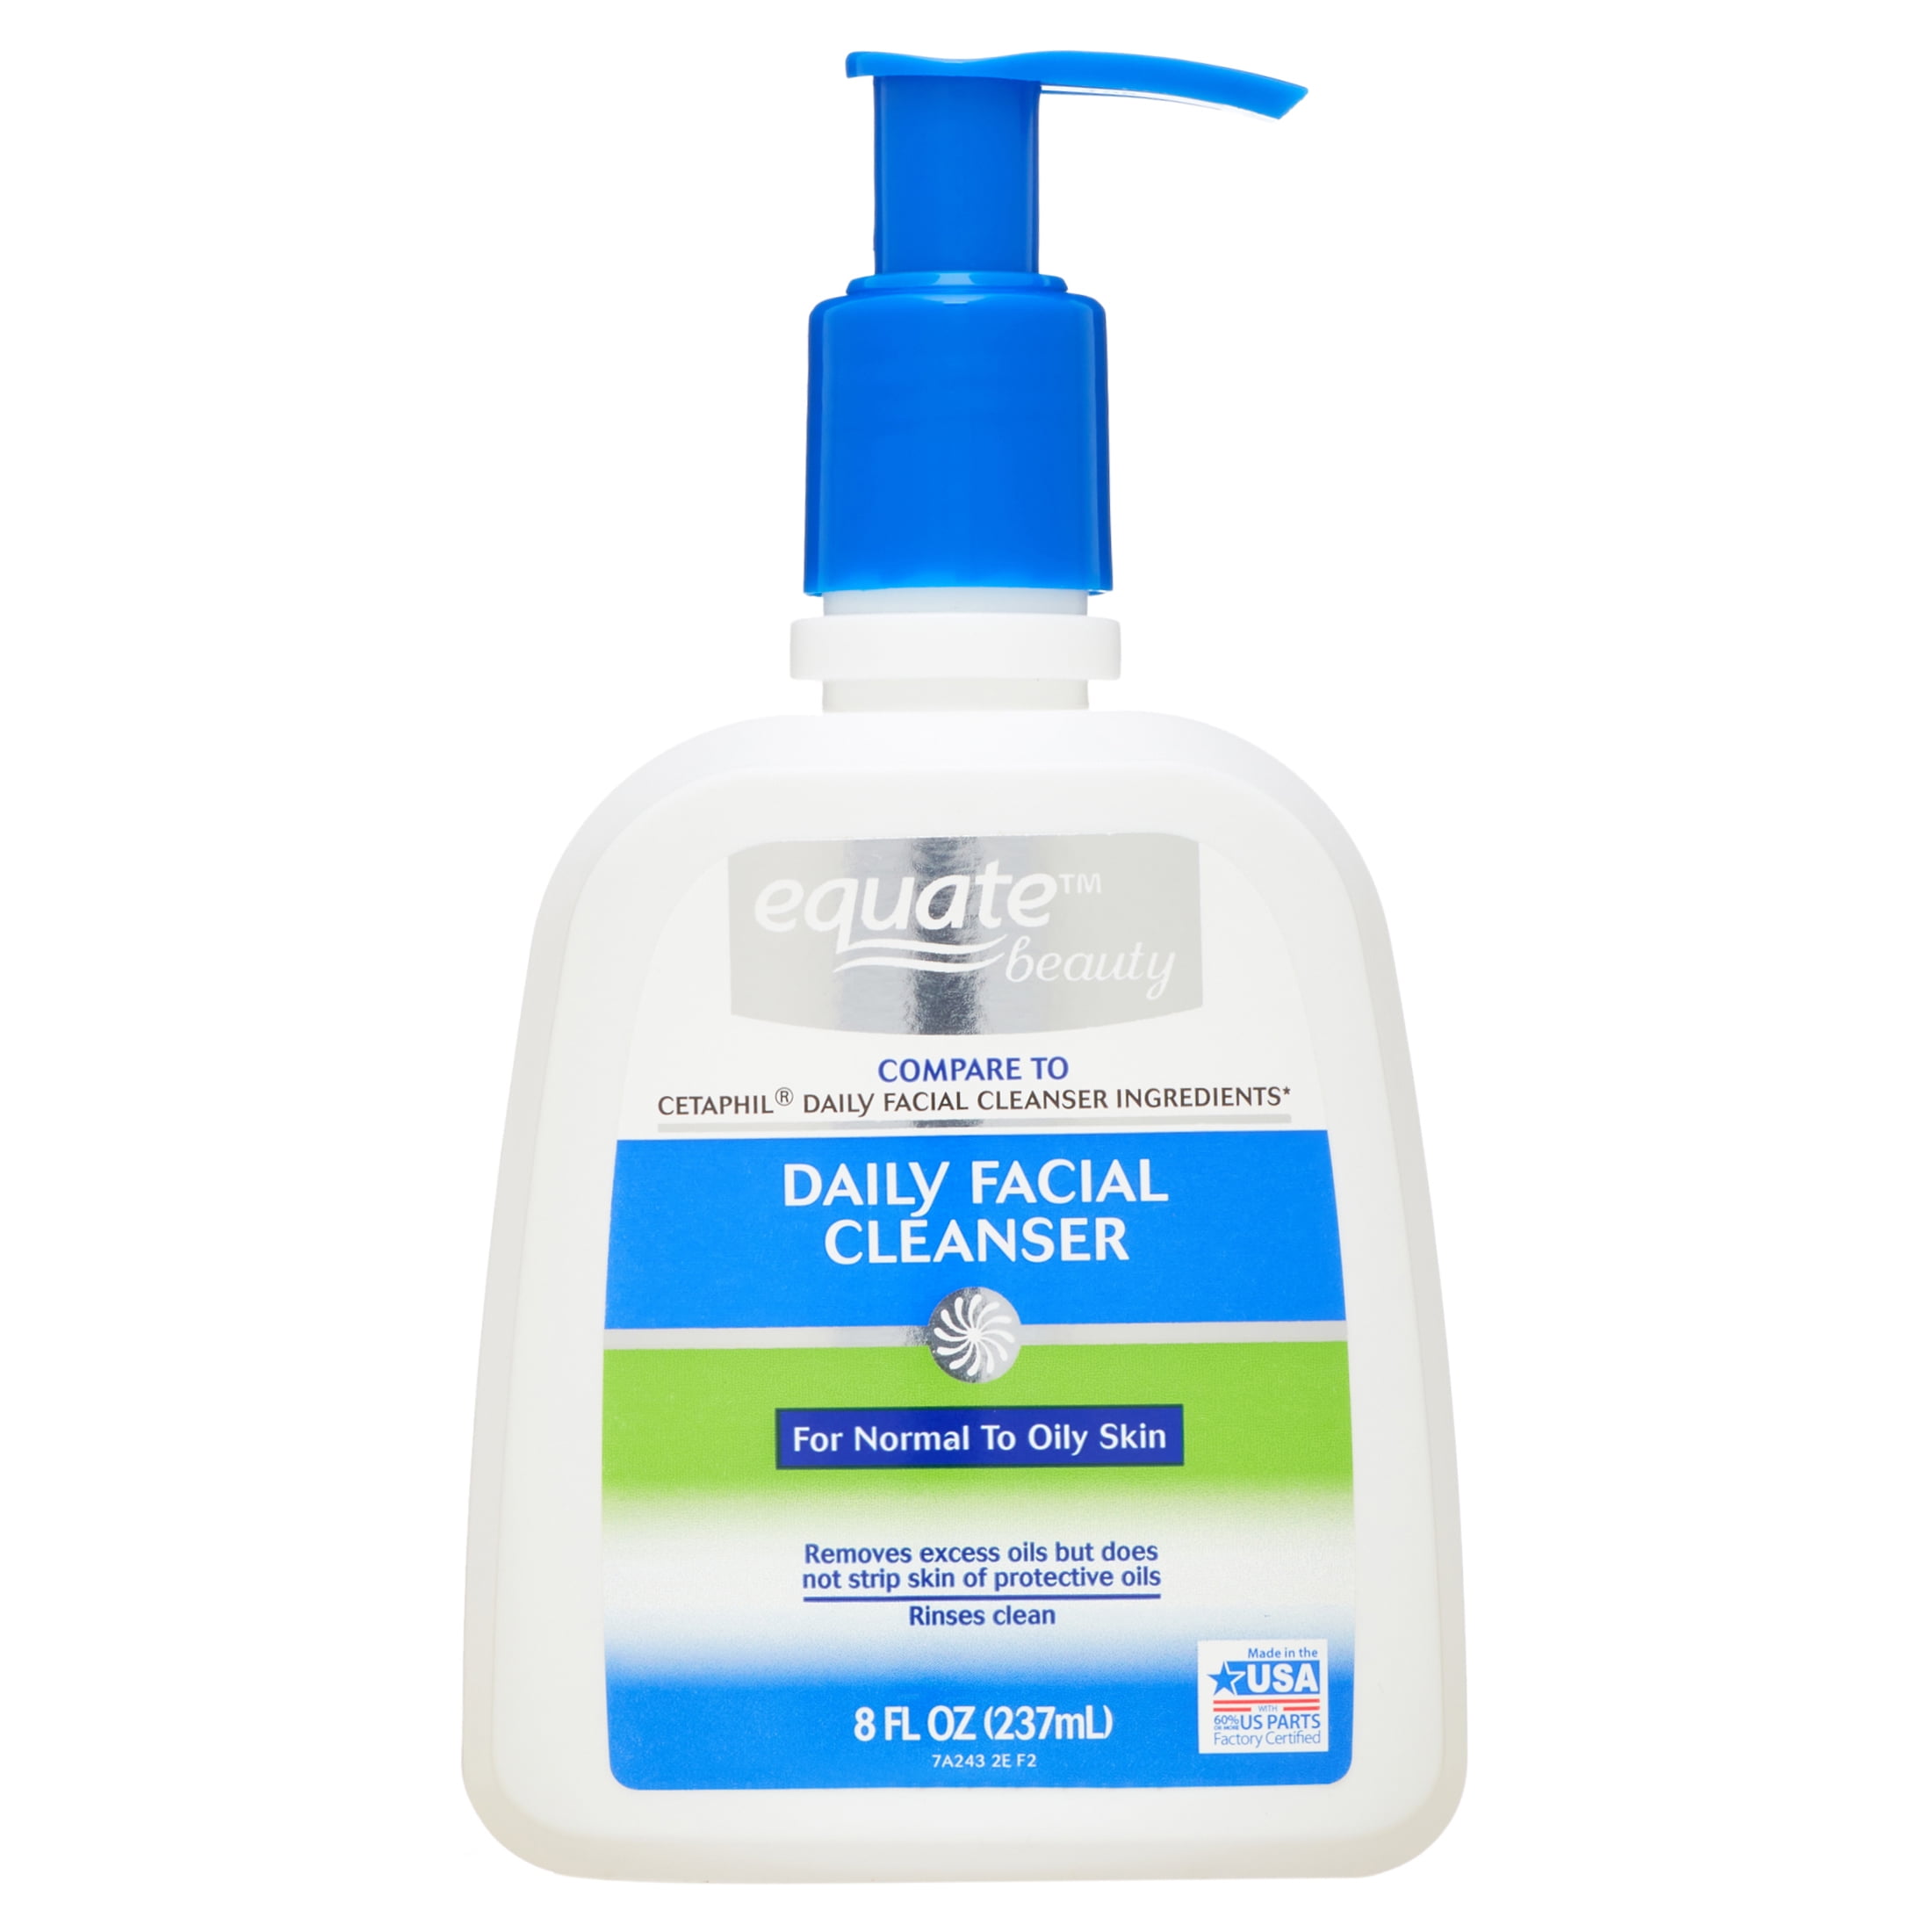 Equate Beauty Daily Facial Cleanser for Normal to Oily Skin, 8 fl oz - Walmart.com